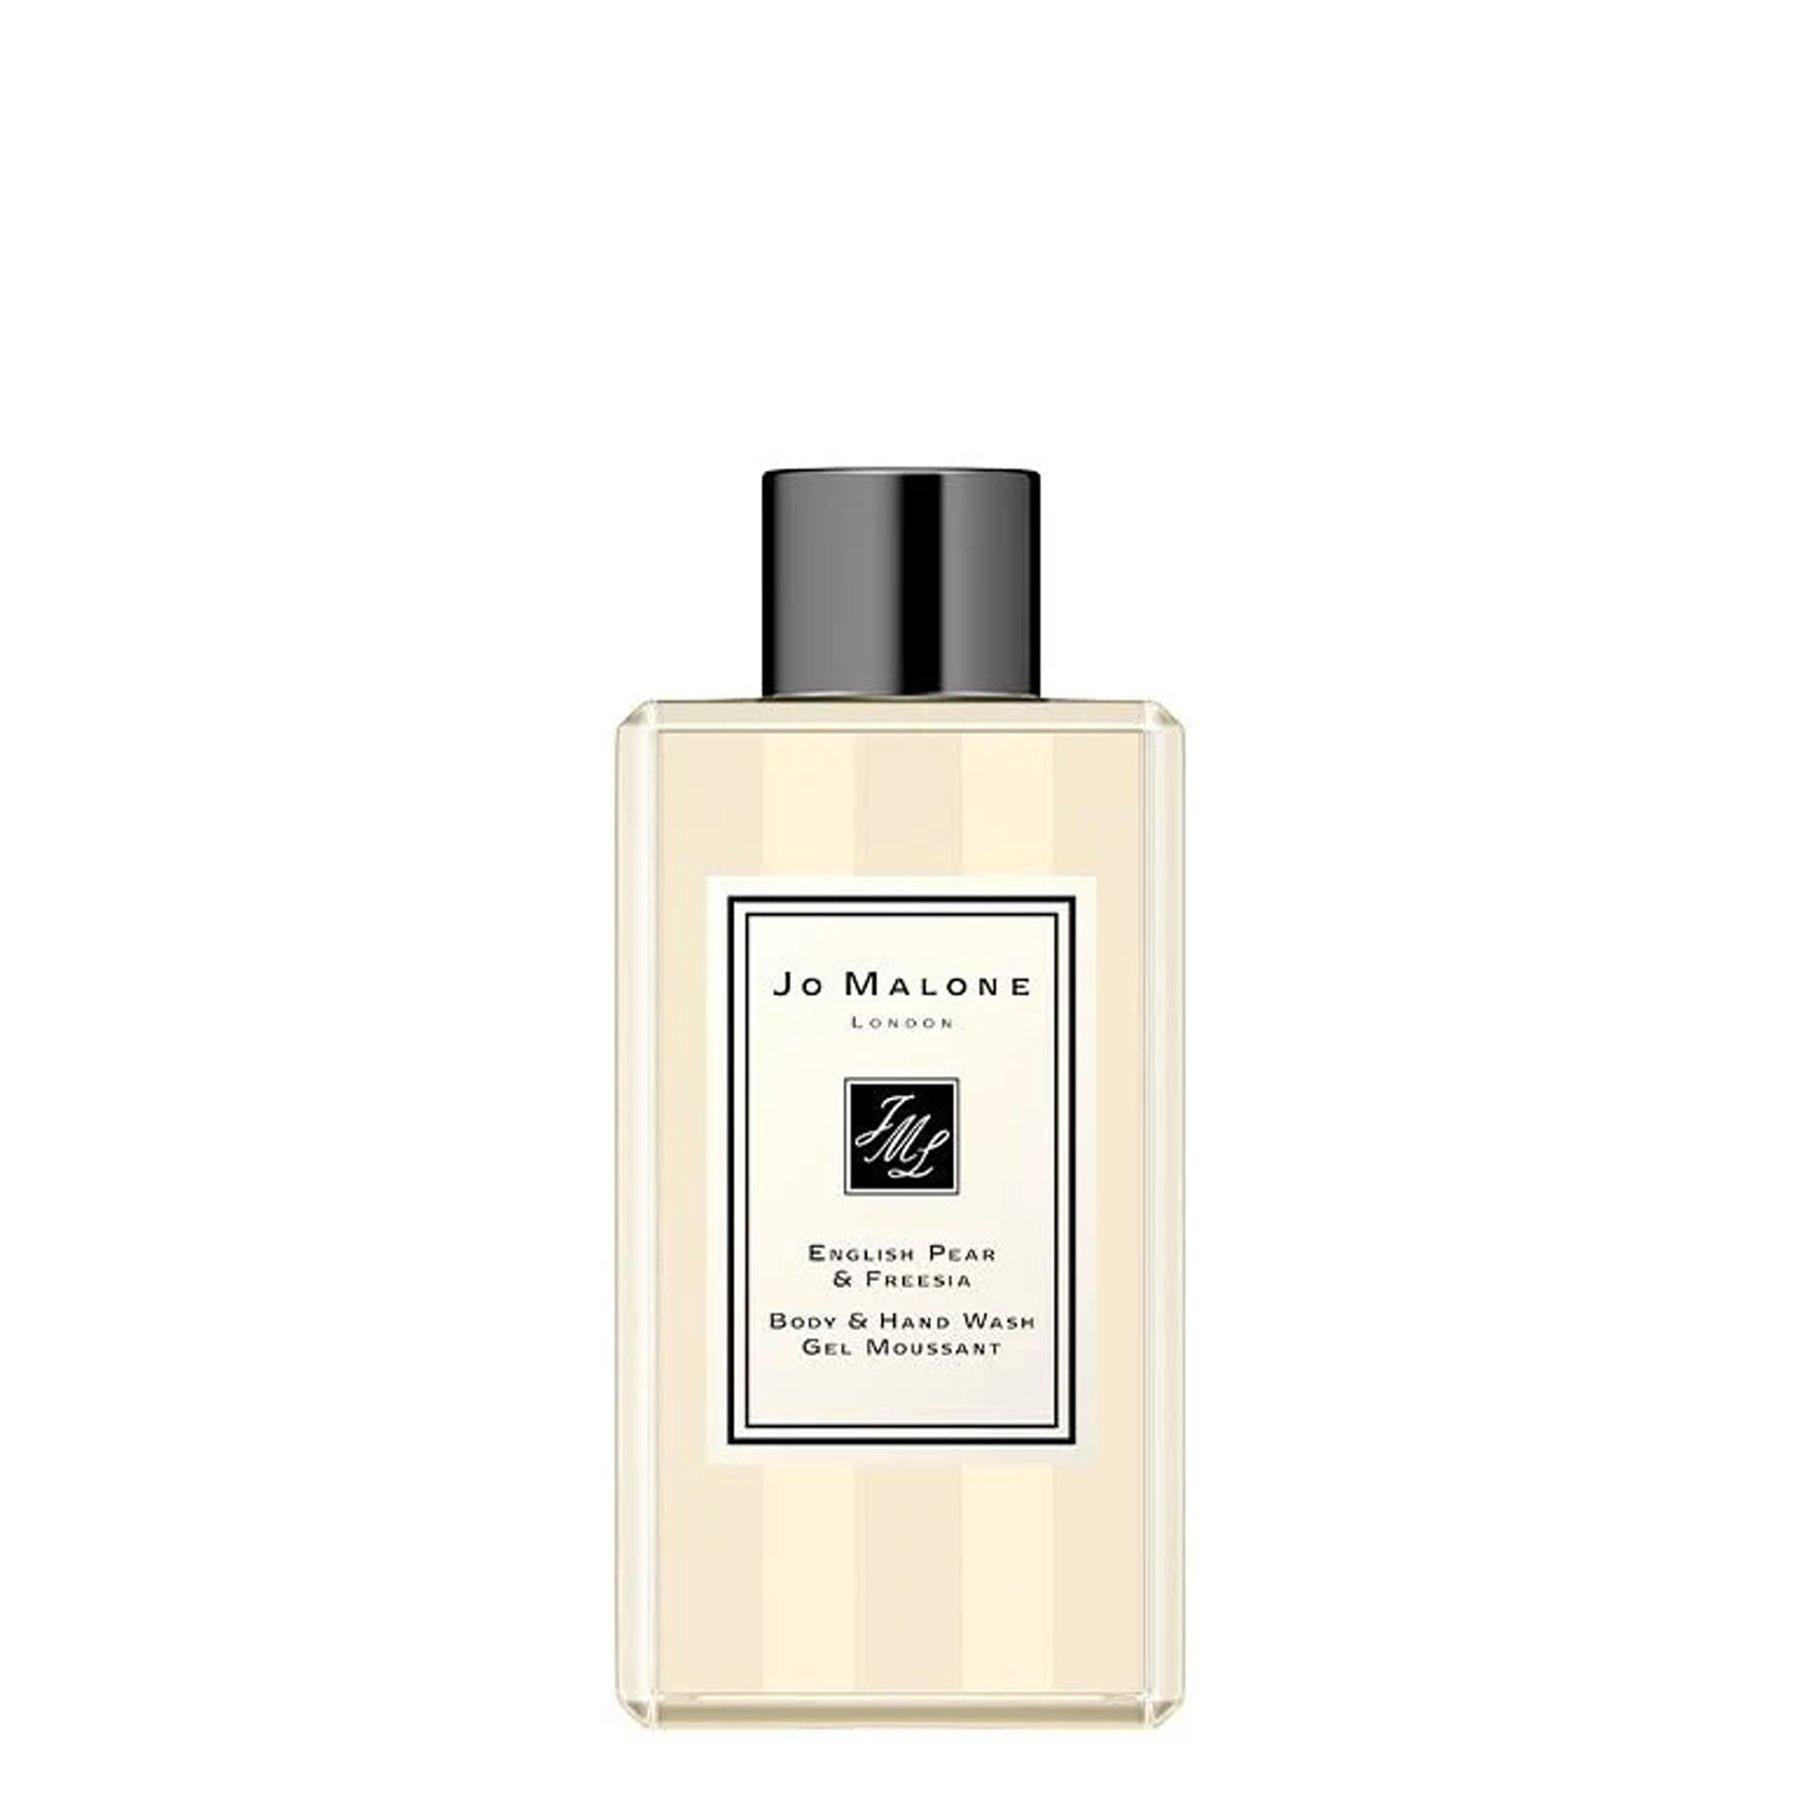 English Pear & Freesia Body & Hand Wash - Cosmos Boutique New Jersey